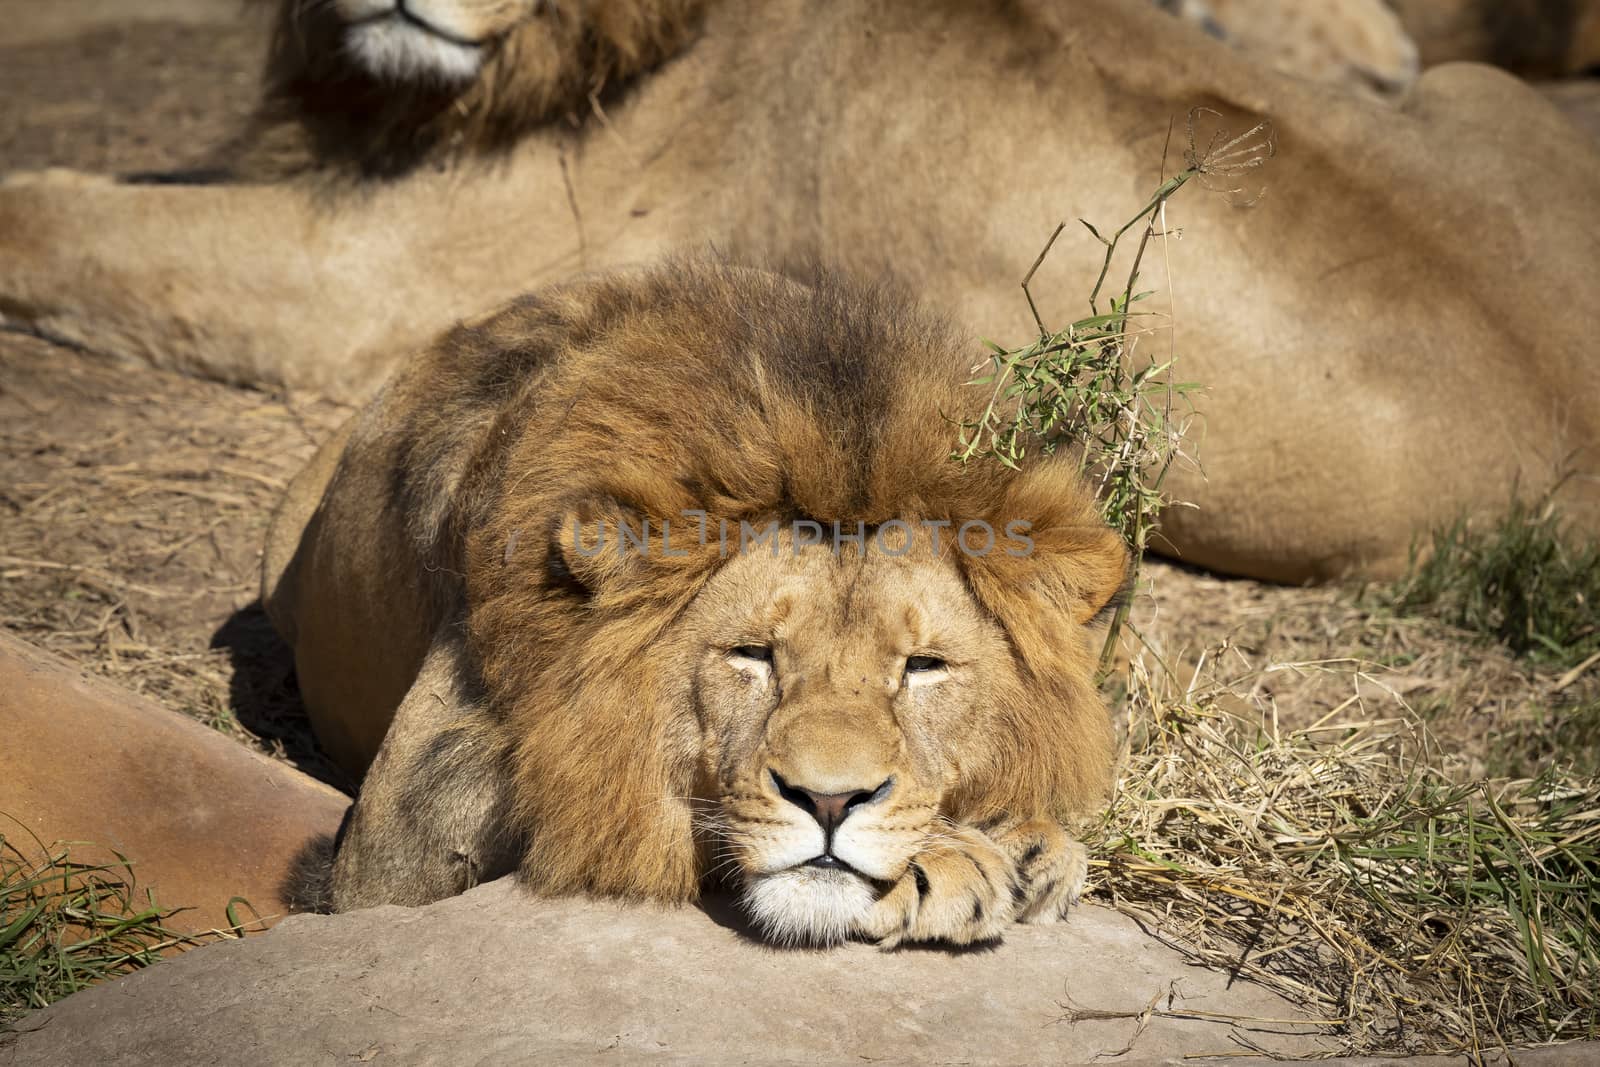 A male Lion relaxing in the sunshine by WittkePhotos